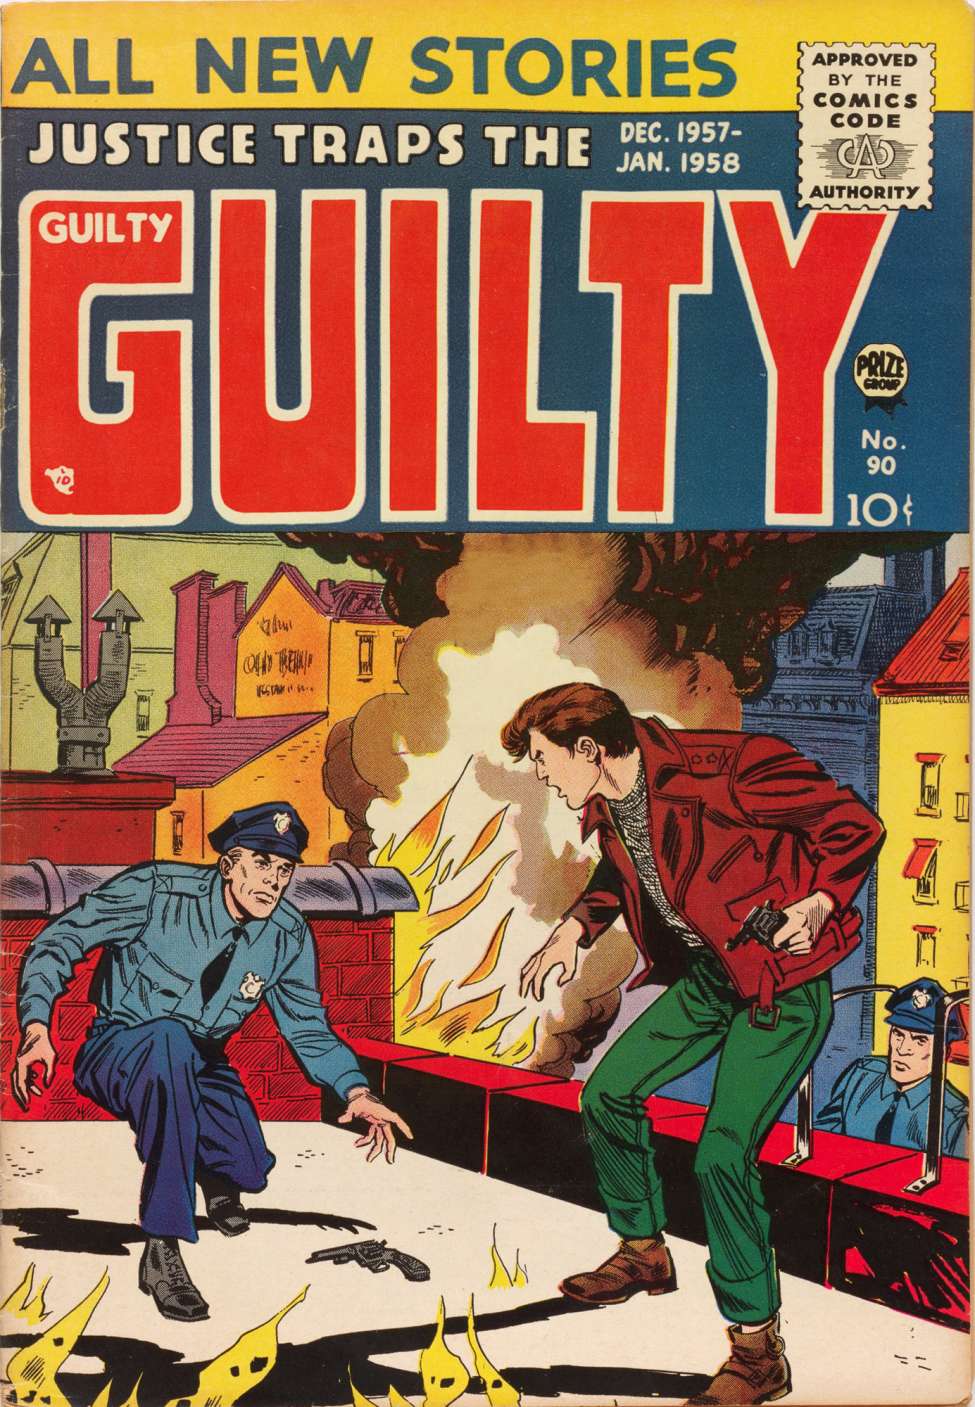 Comic Book Cover For Justice Traps the Guilty 90 (alt)